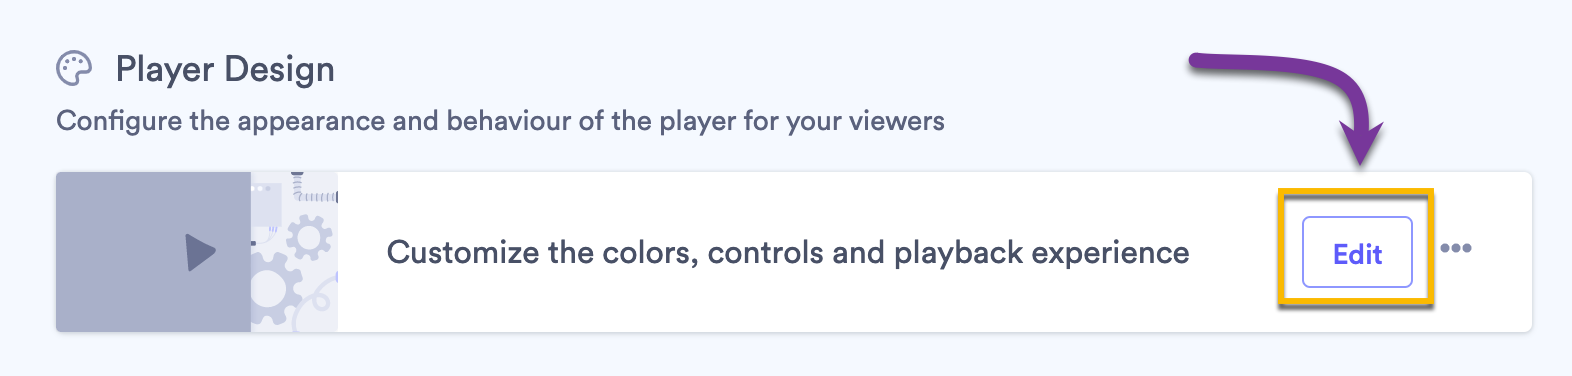 Vidyard video settings player design section with edit button highlighted